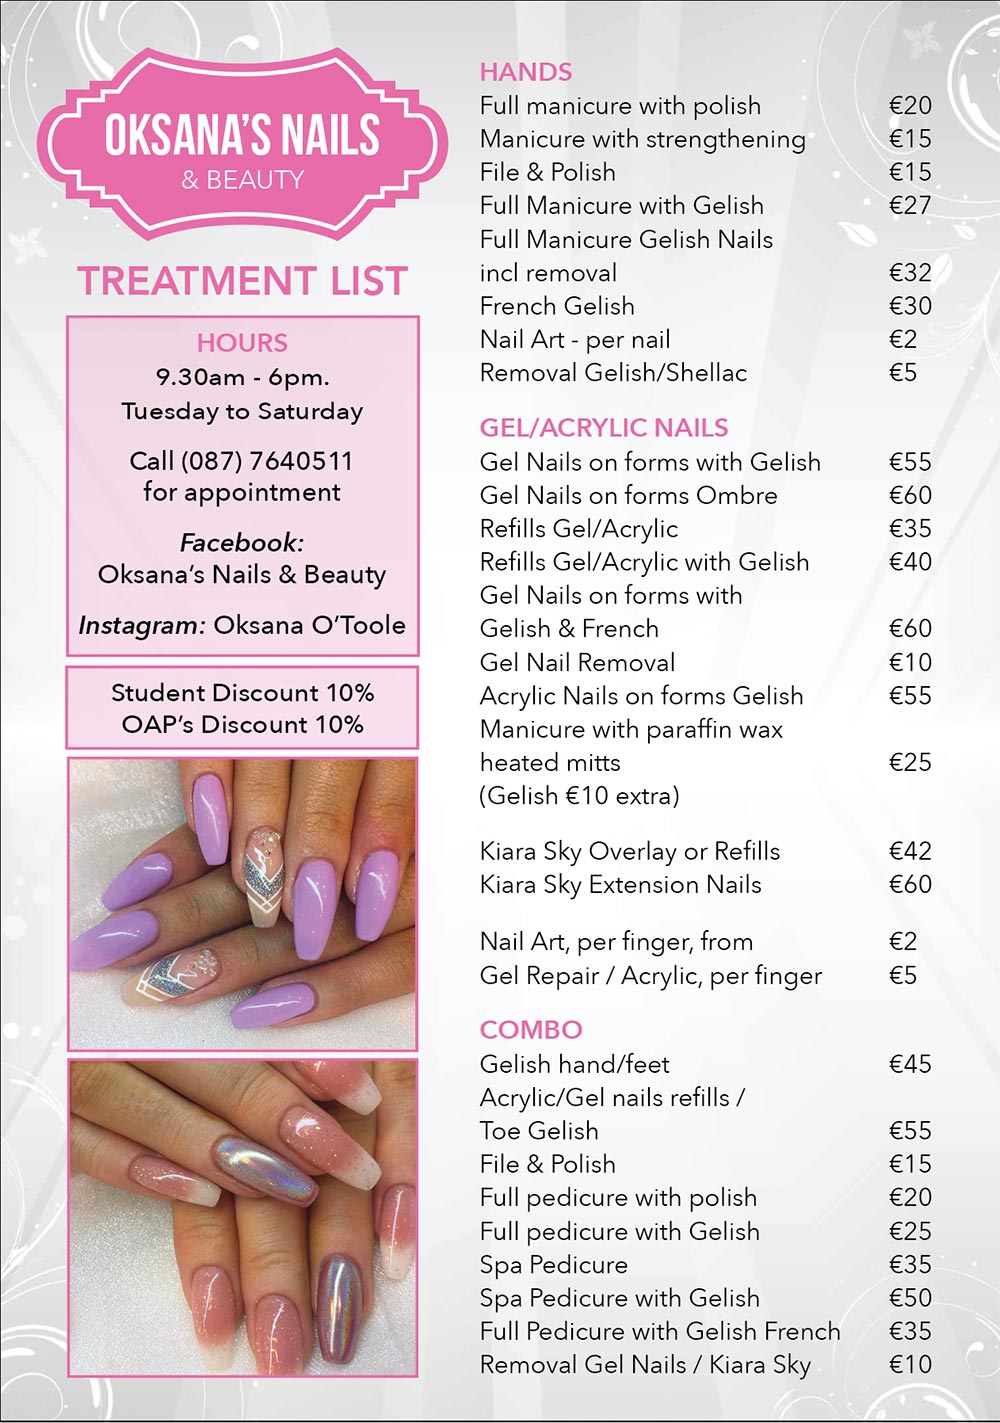 Cheap Acrylic Nails Near Me Prices - I am a trained nail technician but